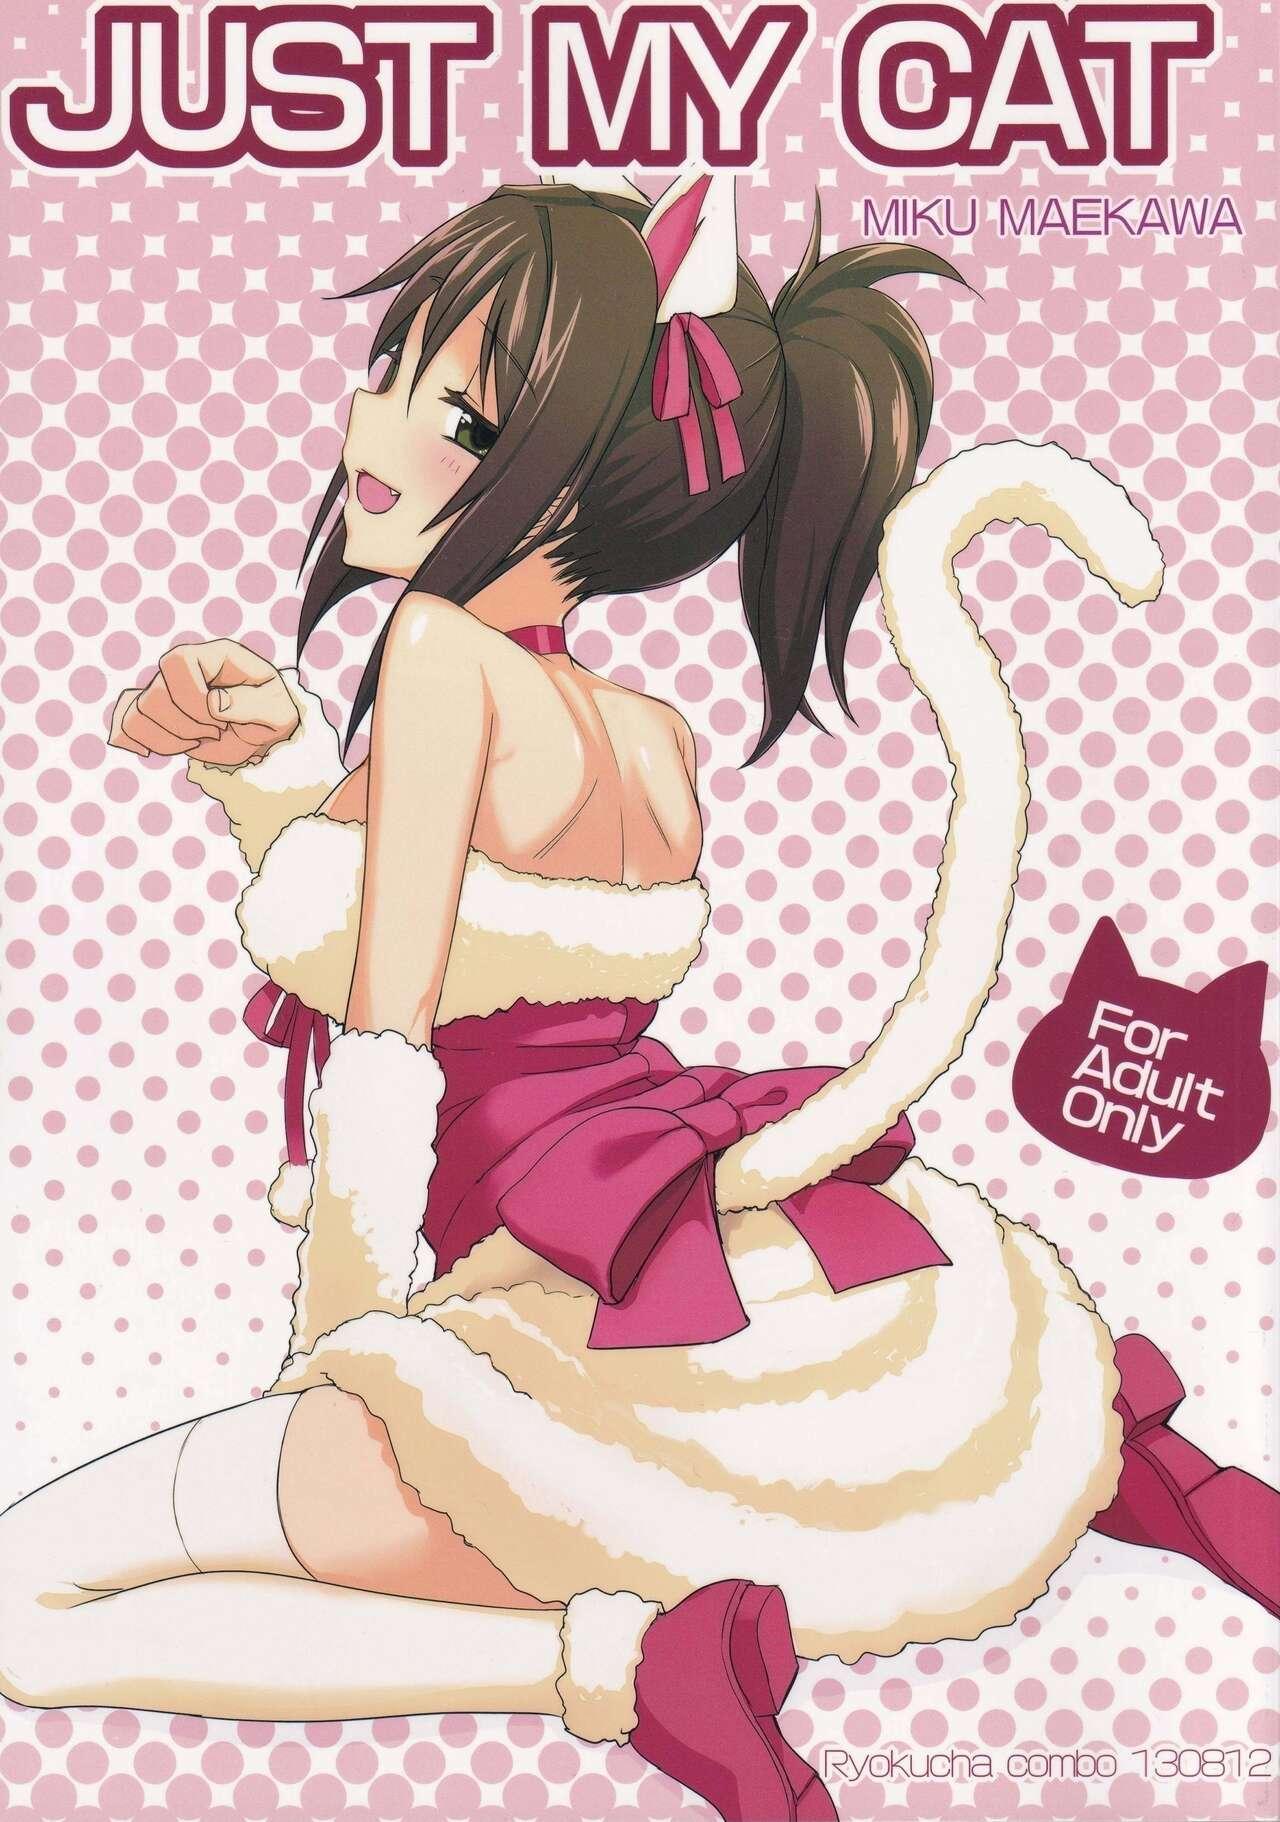 Dancing JUST MY CAT - The idolmaster Adolescente - Picture 1